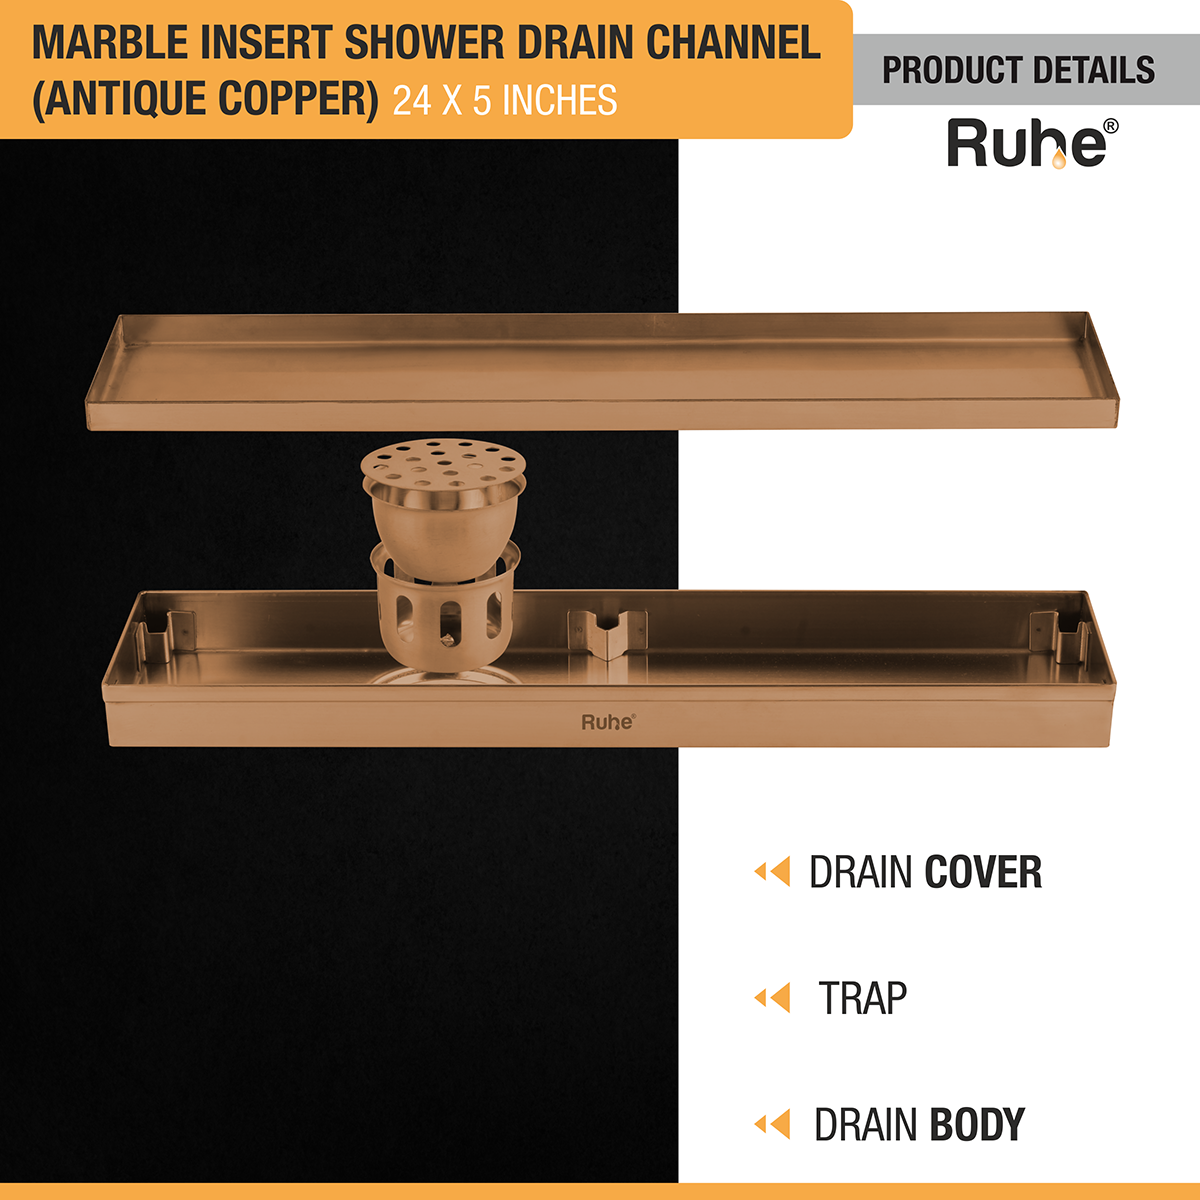 Marble Insert Shower Drain Channel (24 x 5 Inches) ROSE GOLD PVD Coated with drain cover, trap, and drain body